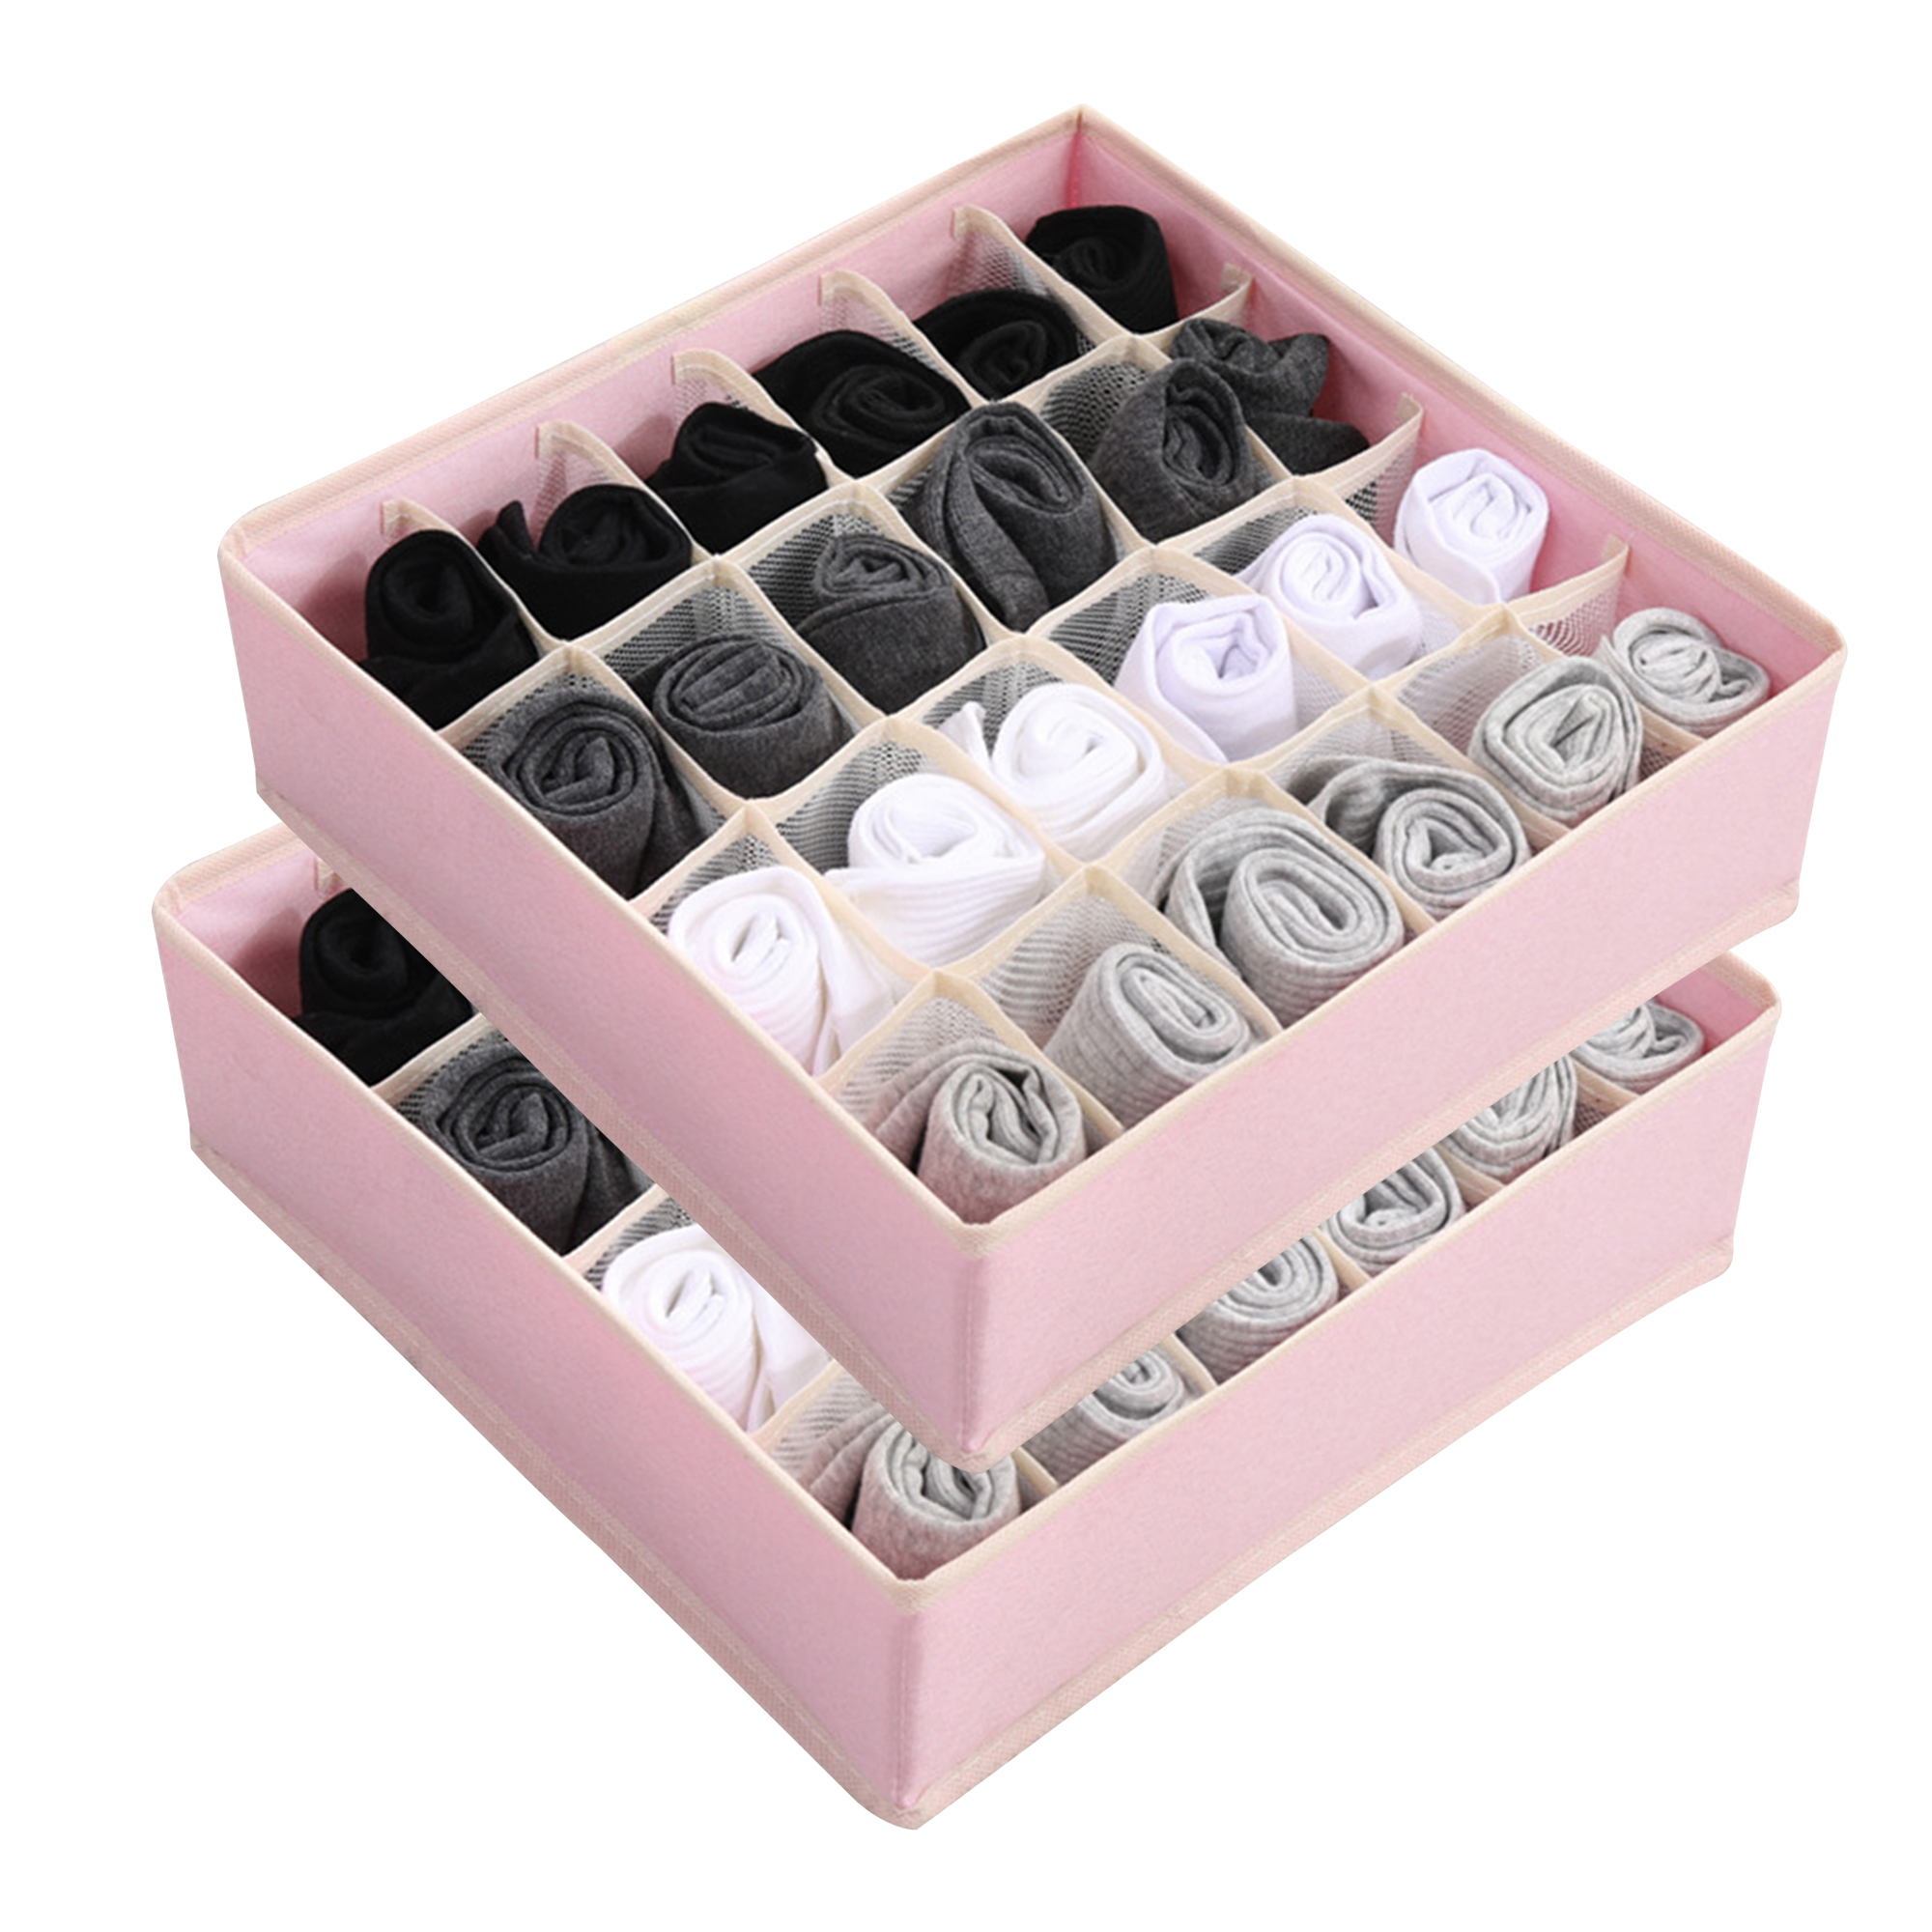 Set of 2 Drawer Organizer, Non-Woven Fabric Divider Drawer Organizer 24 Cells, Collapsible Storage Boxes for Socks, Underwear, Ties, Scarves（Pink） - image 1 of 5